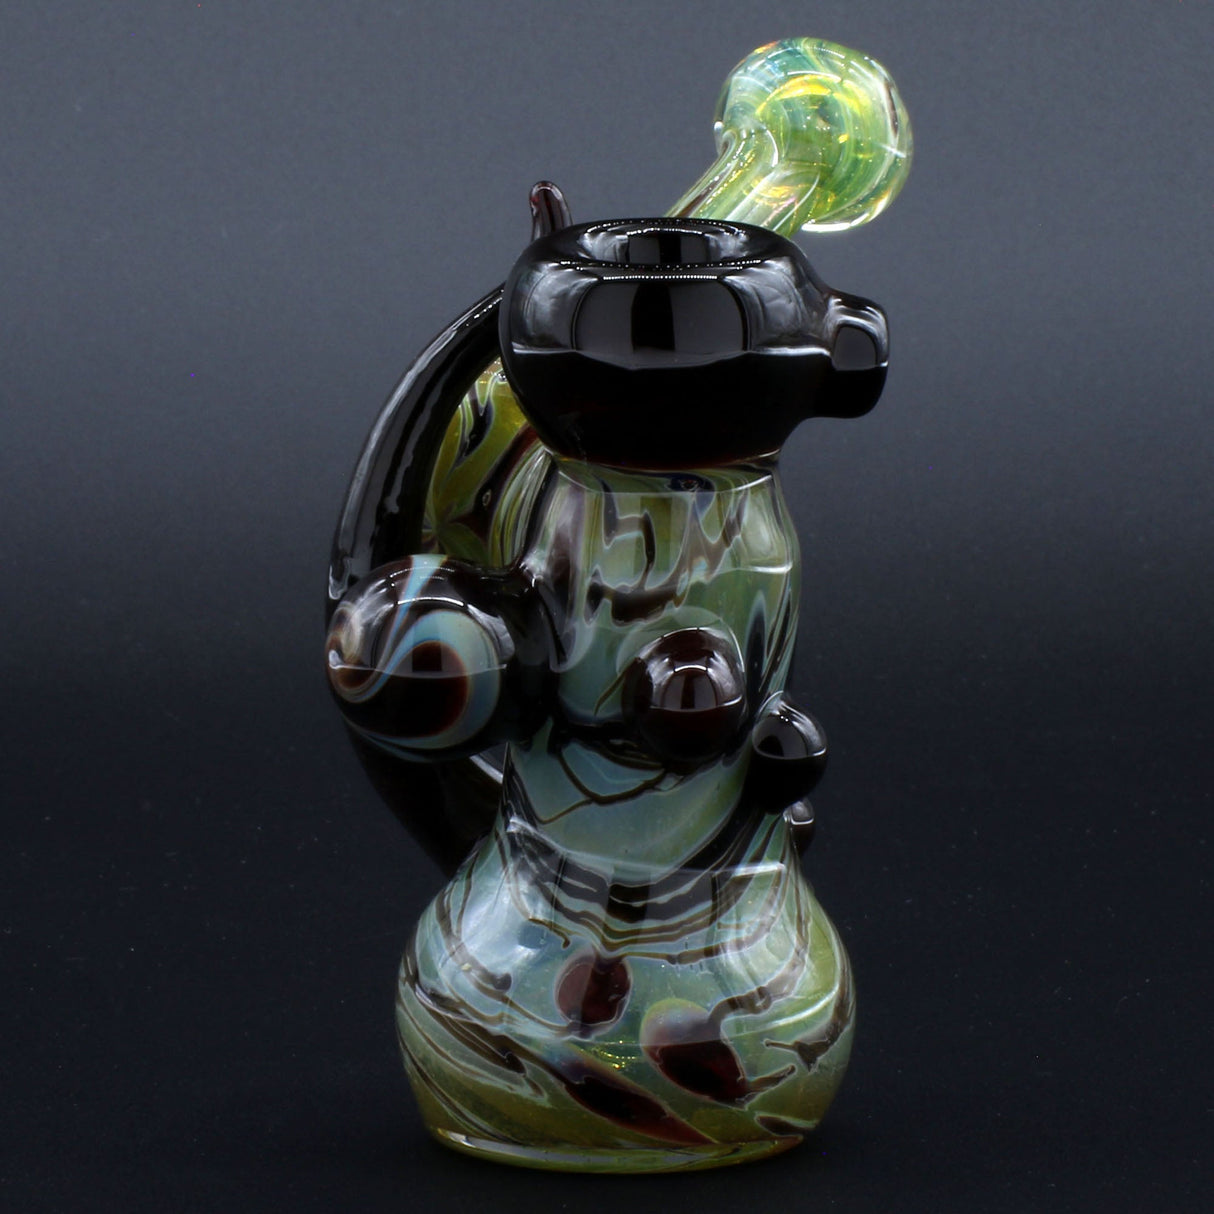 Clayball Glass "Red Horn Nebula" Heady Sidecar Bubbler with Bubble Design on Black Background